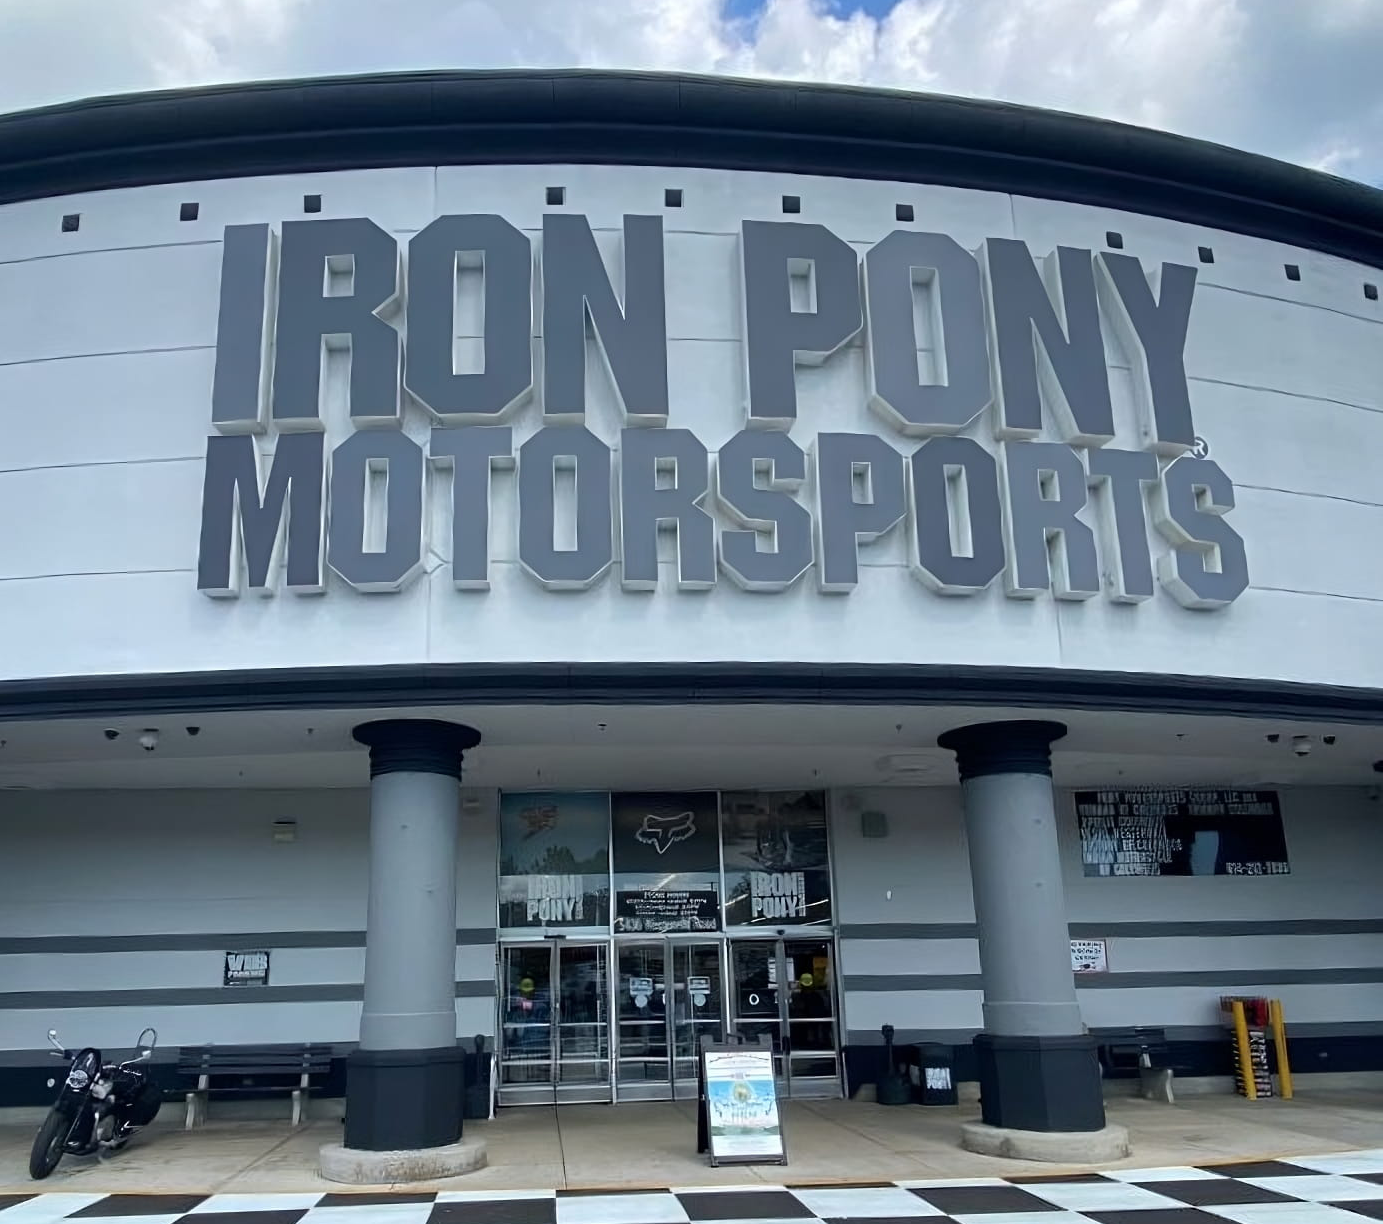 Iron Pony Main Entrance | Westerville, OH After